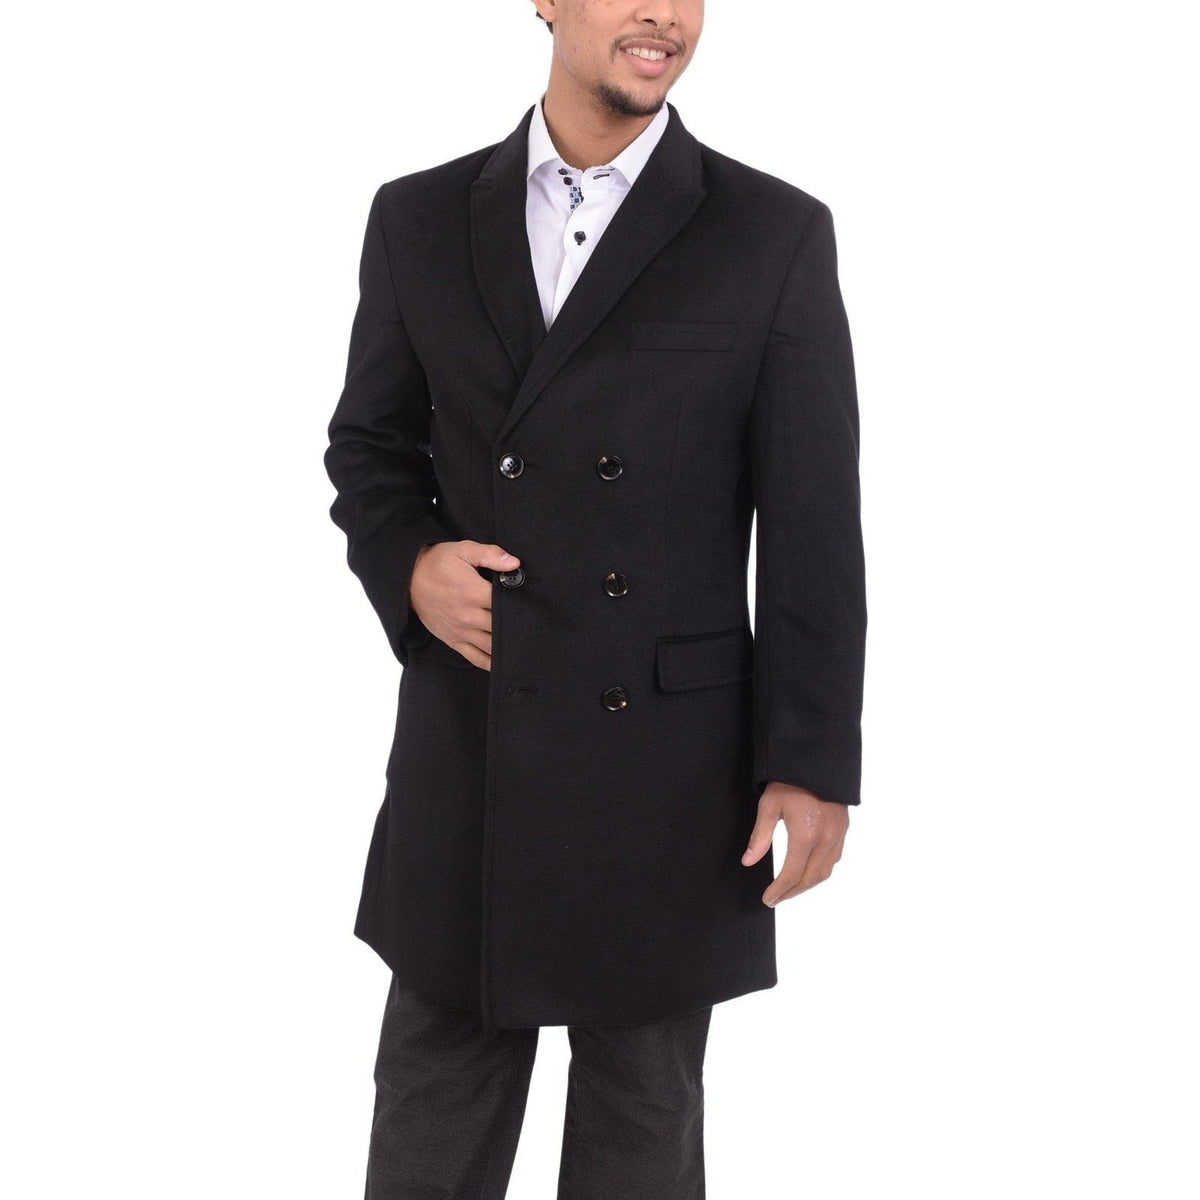 Label E OUTERWEAR Mens Solid Black 3/4 Length Double Breasted Wool Cashmere Overcoat Top Coat